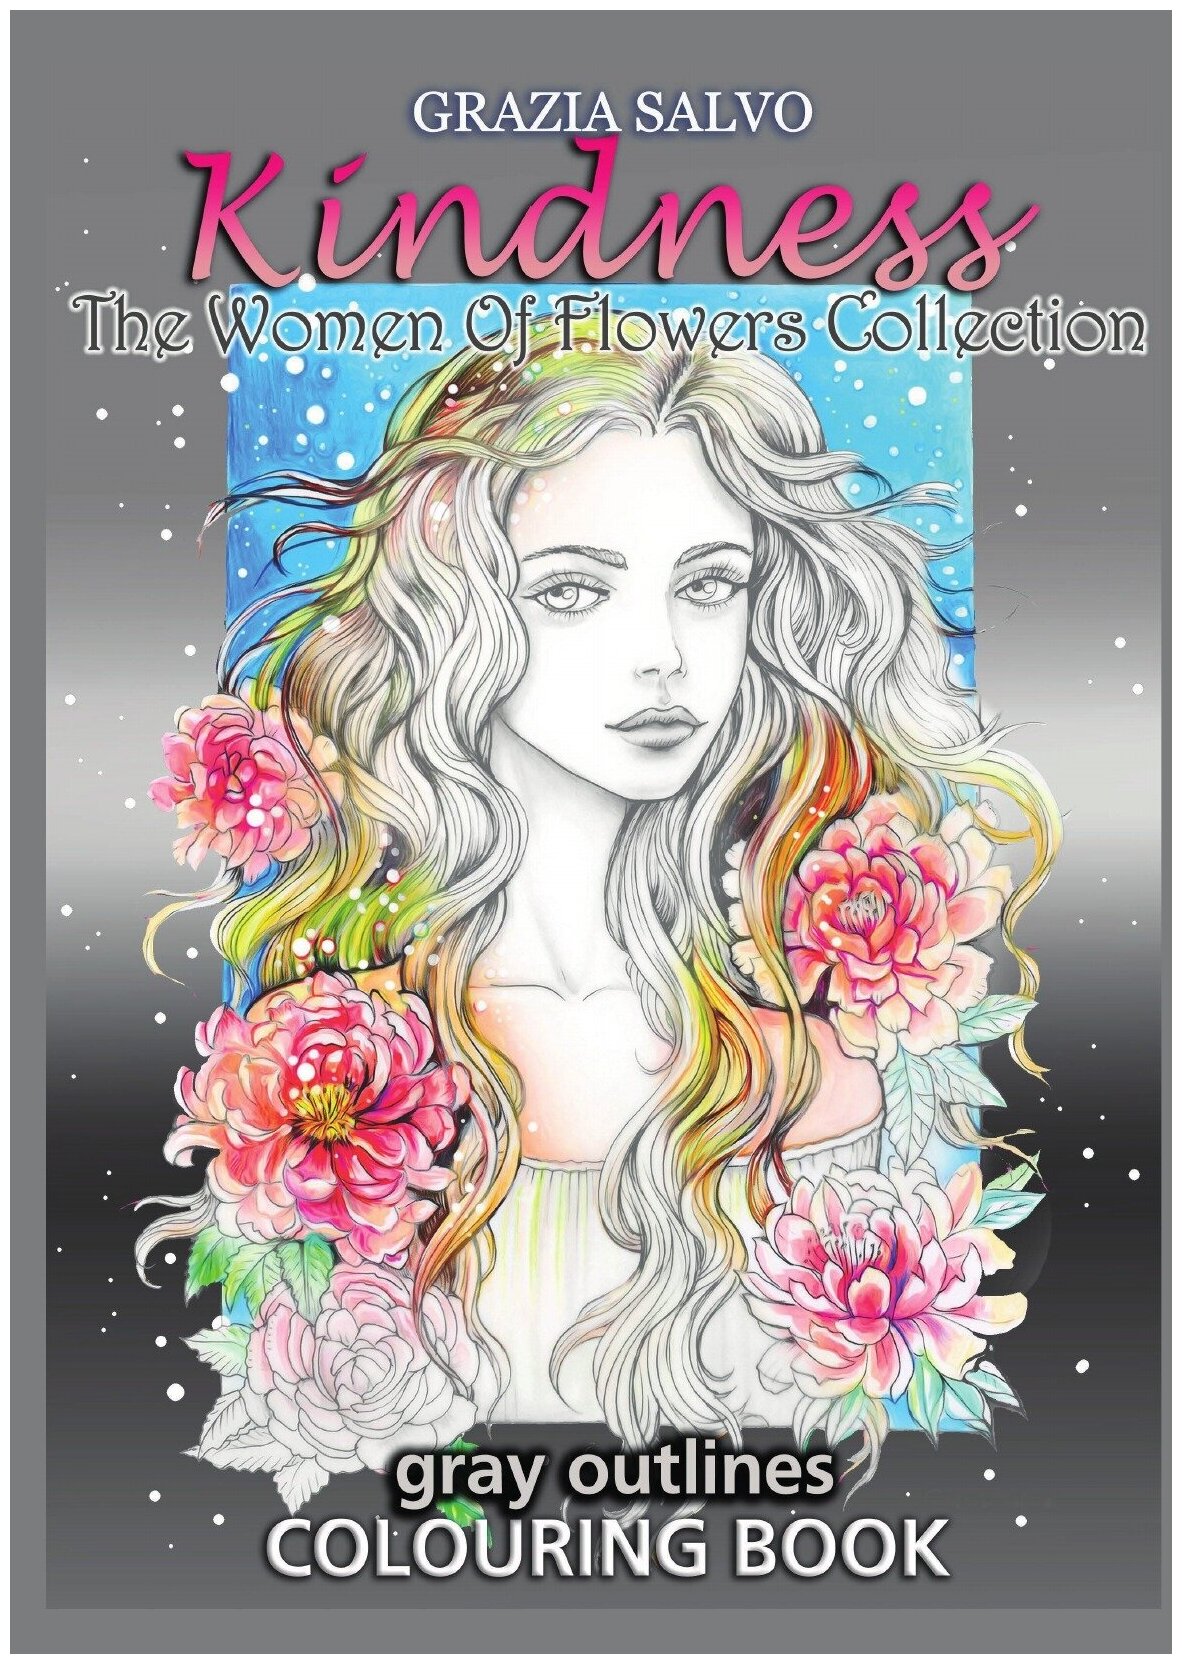 Kindness. The Women of Flowers Collection